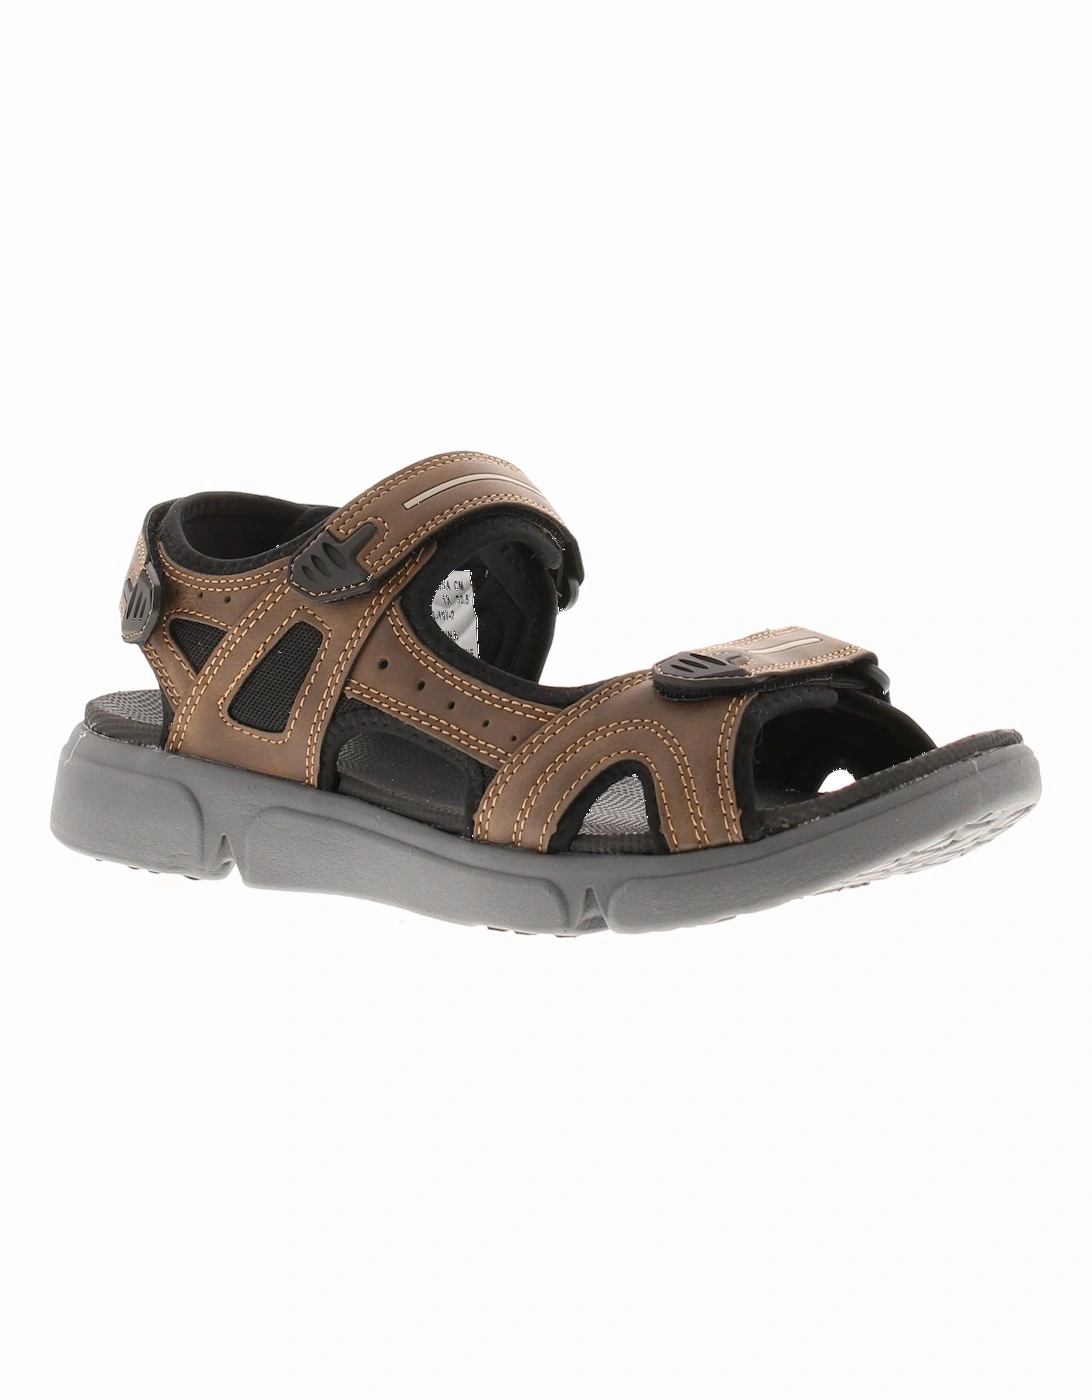 Mens Sandals Comfortable Castro Touch Fastening brown UK Size, 6 of 5